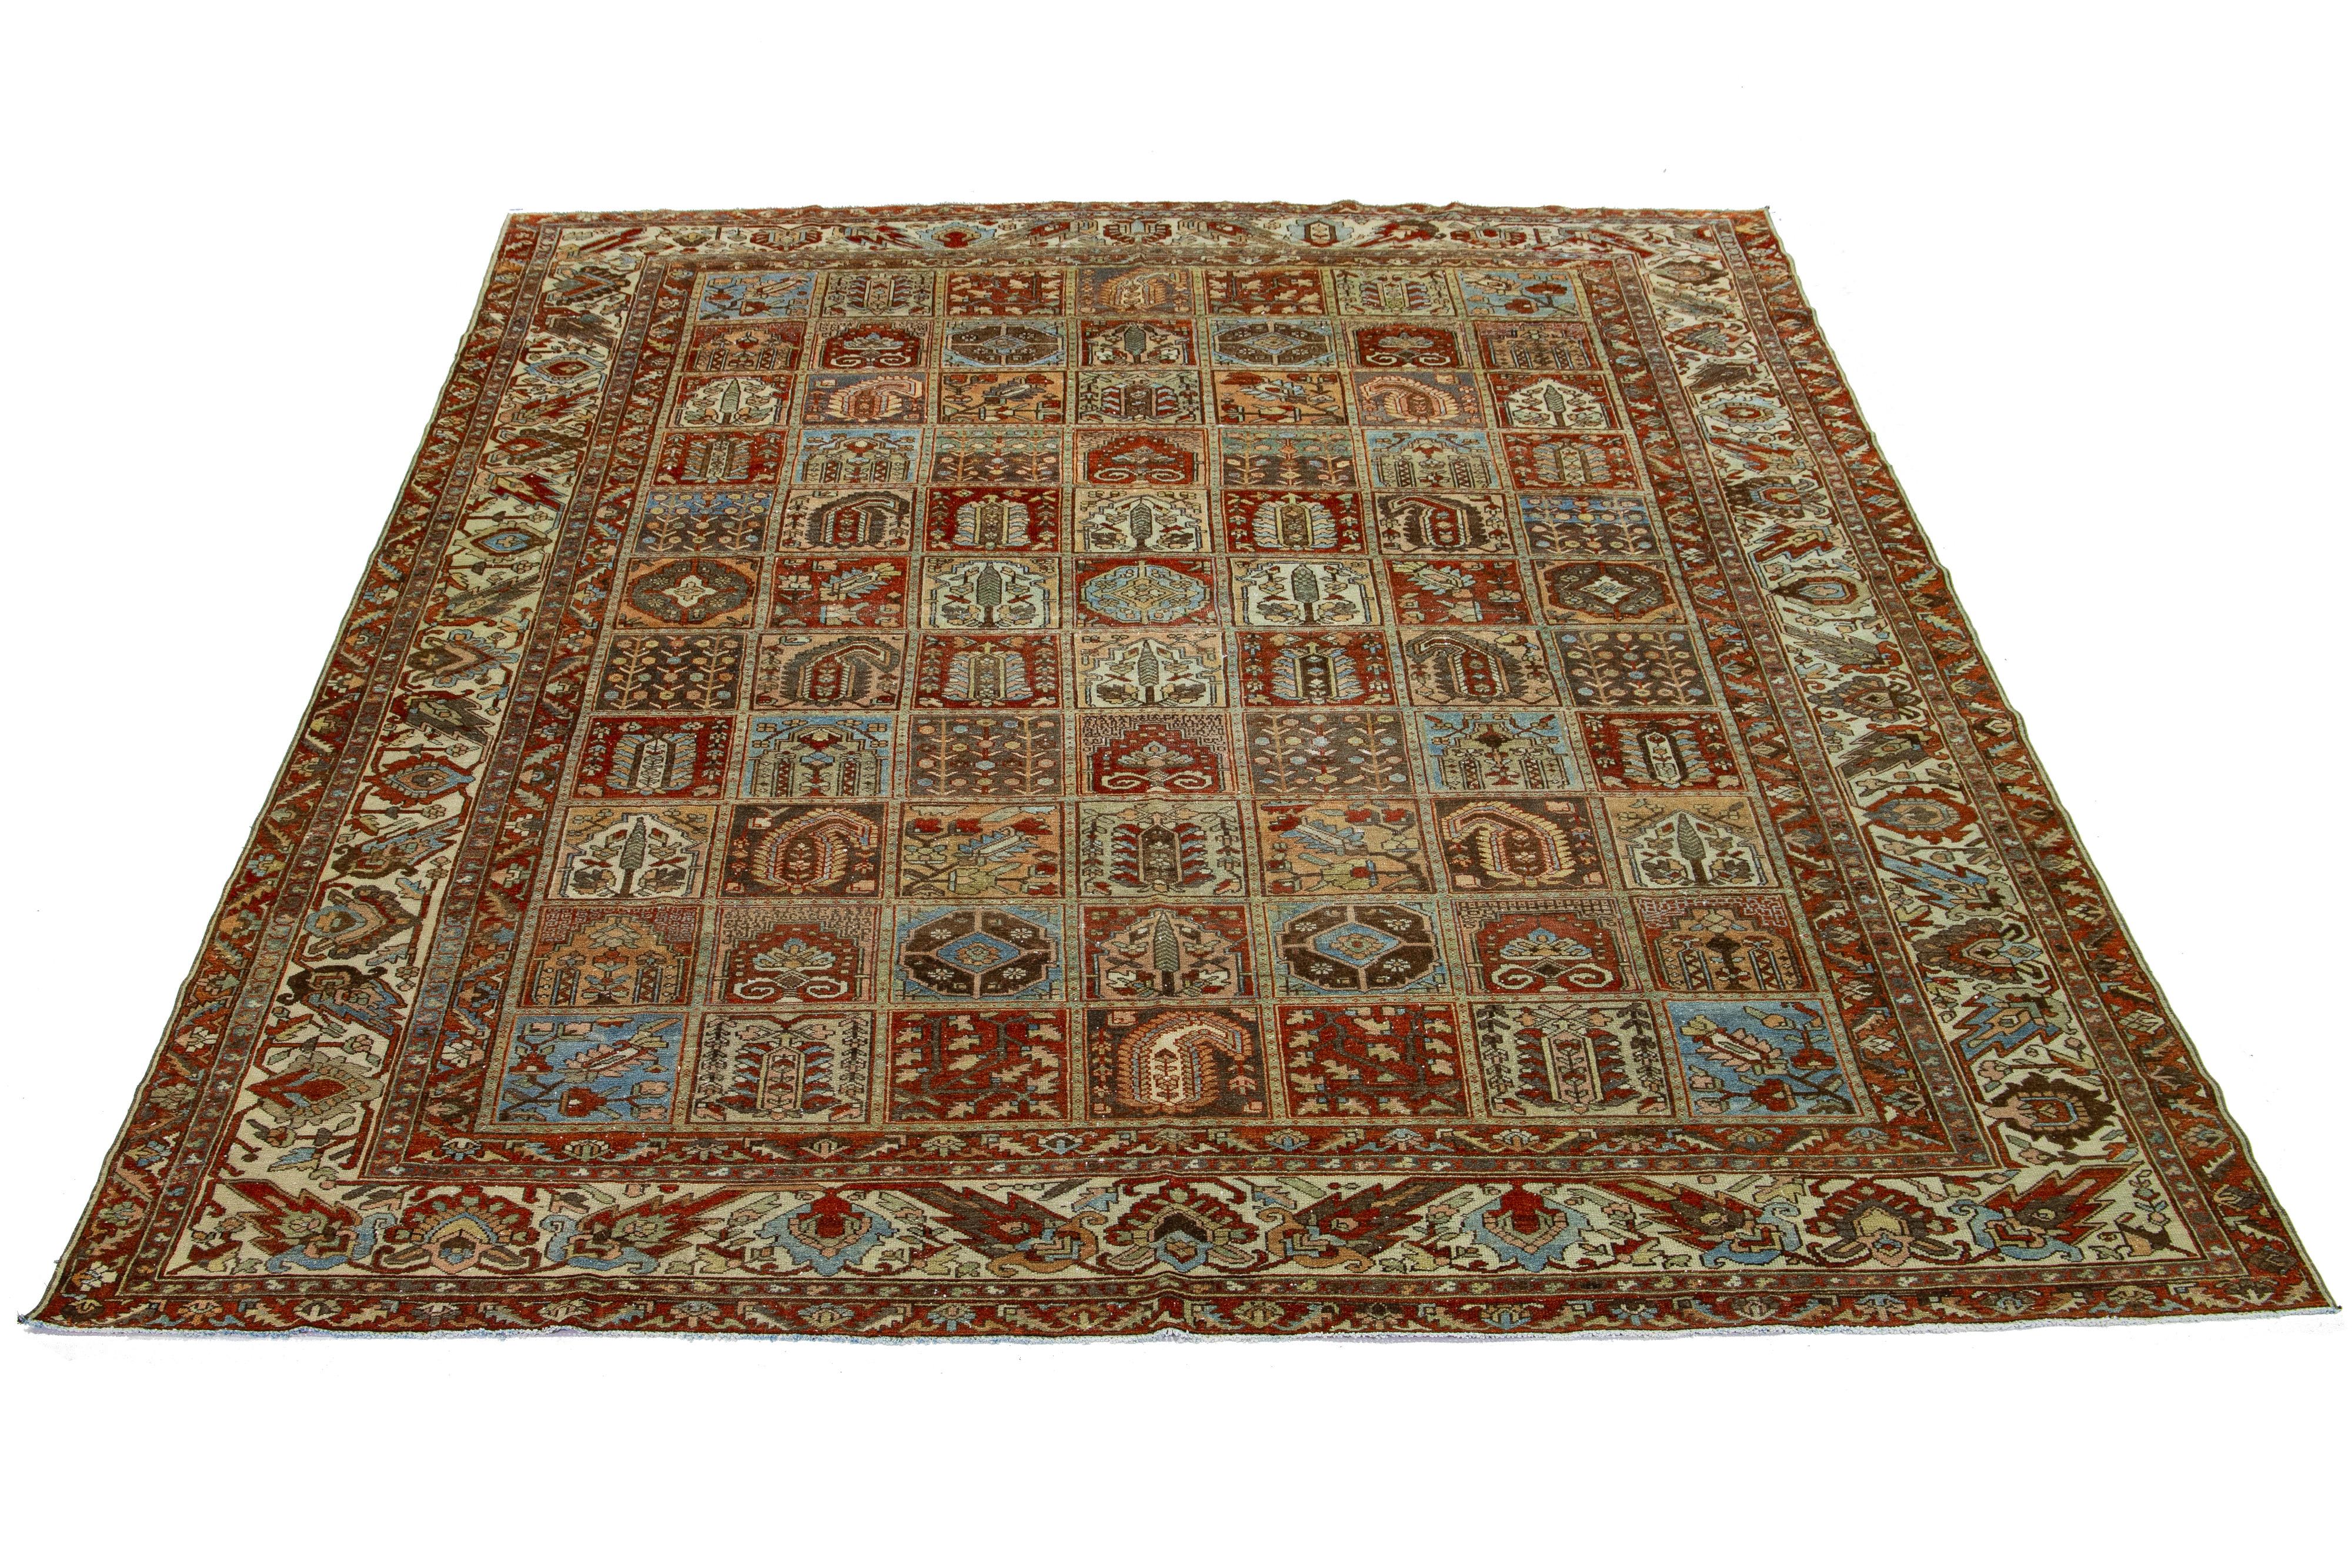 Beautiful Antique Bakhtiari hand-knotted wool rug with a blue, red-rust, beige, and peach color field. This Persian piece has an all-over geometric floral design.

This rug measures 10'6